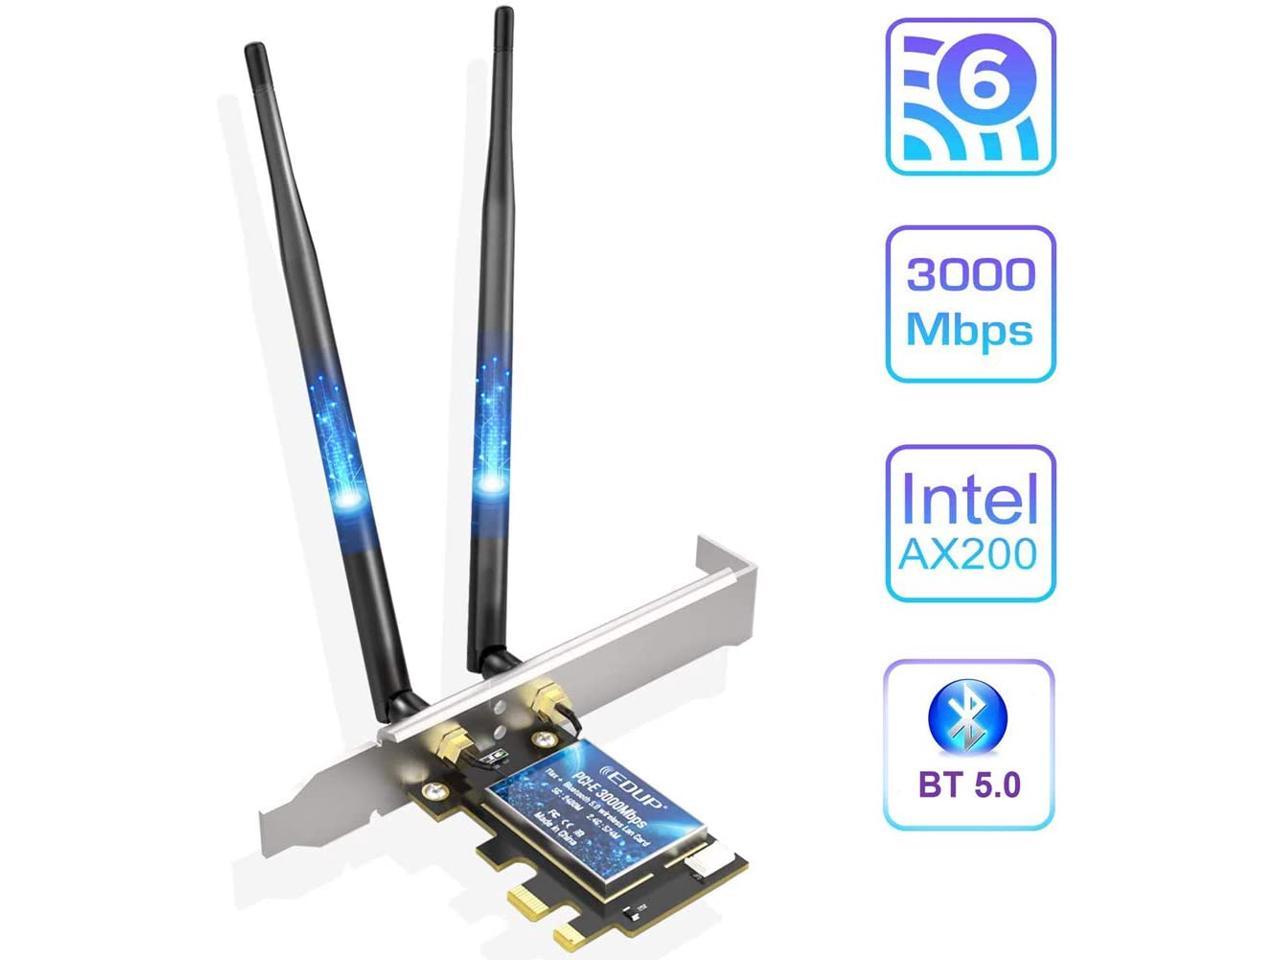 Ubit Pcie WLAN Card 1800 Mbit/s WiFi 6 AX200 PCIe Network Card 802.11 AX/AC PCI E WLAN Adapter with Bluetooth Ultra-Low Latency Support Win 10/11